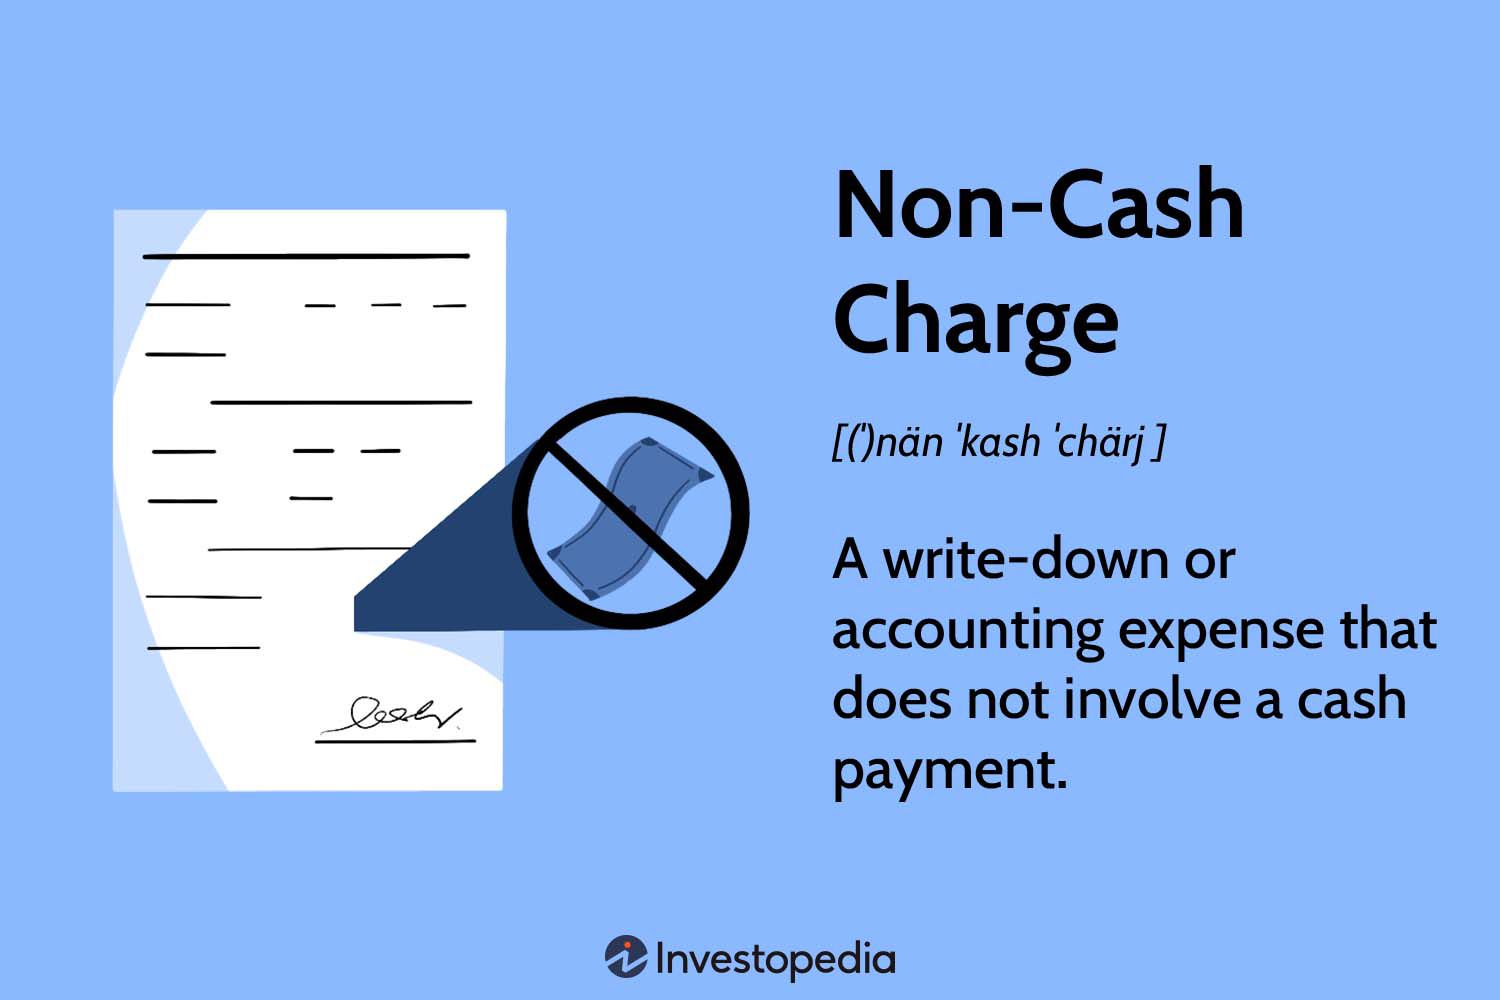 Non-Cash Charge